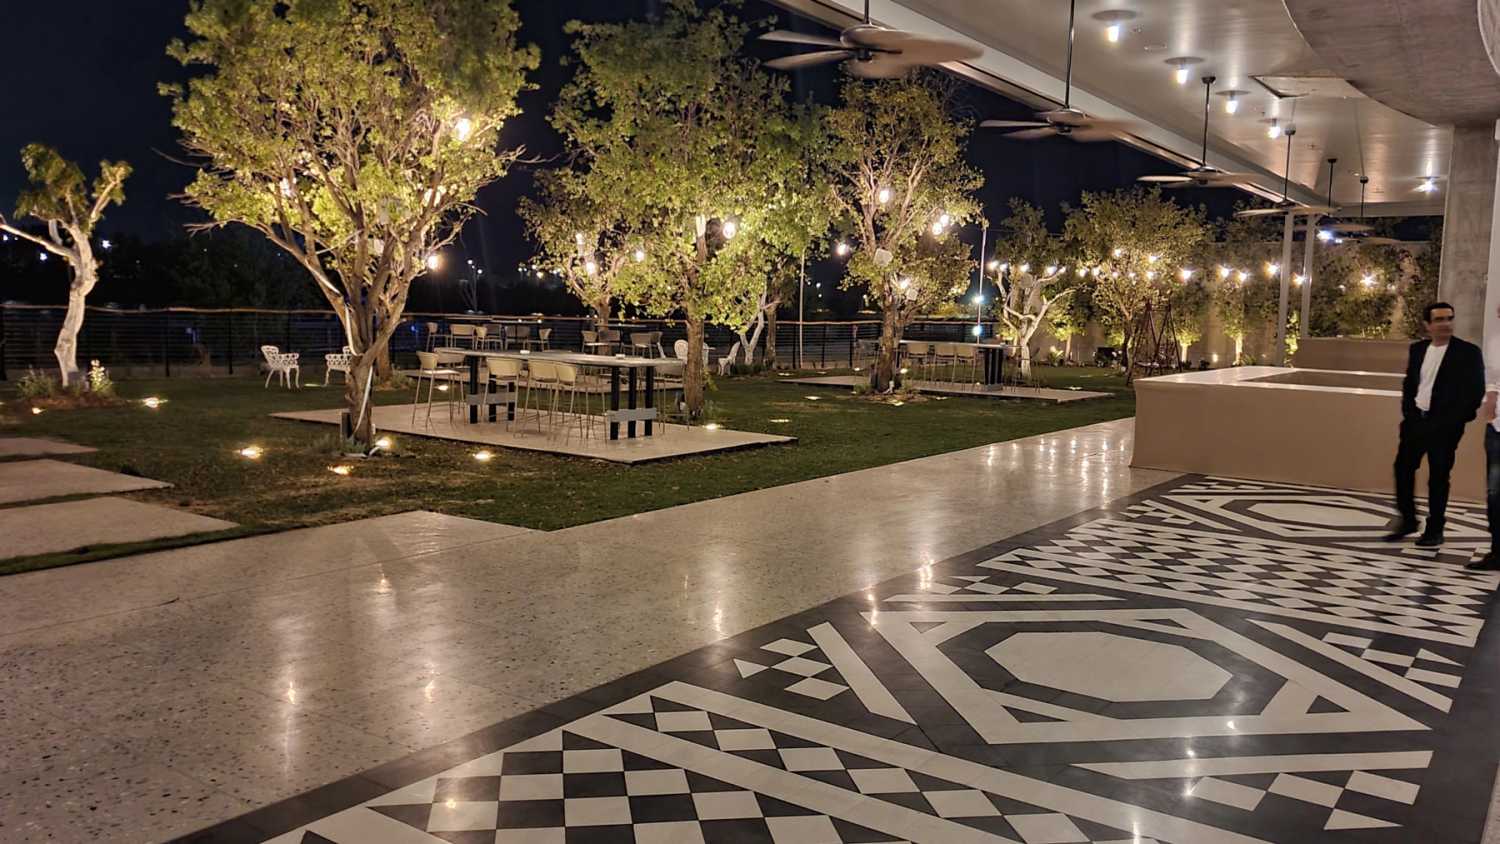 Dua by Lago is one of Israel’s leading venues for weddings, proms and other special occasions